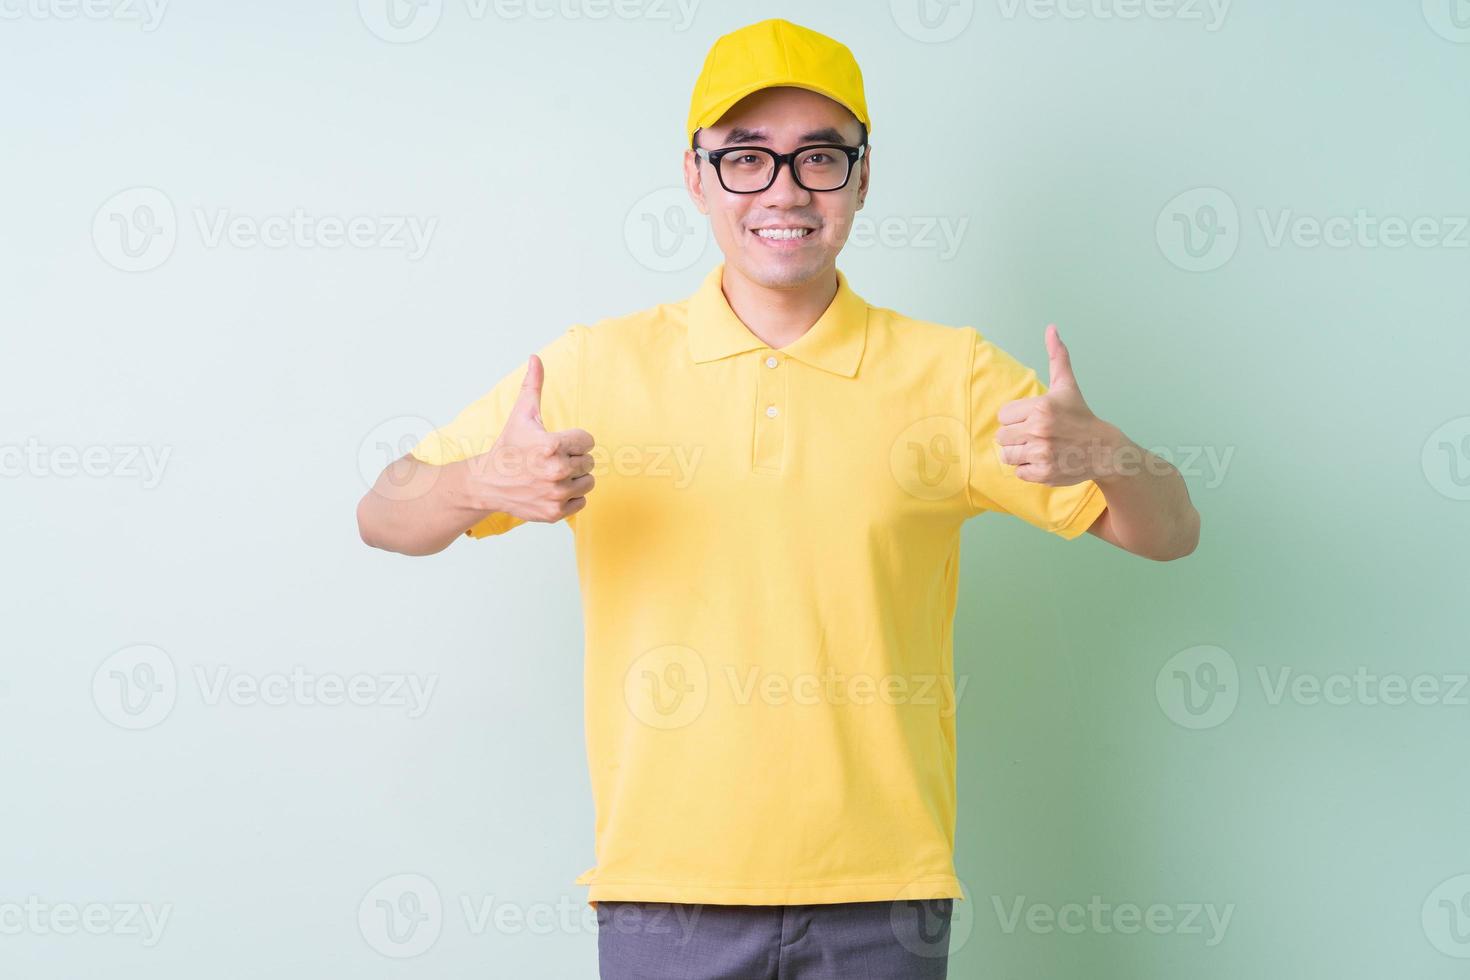 Young Asian delivery man posing on green background photo